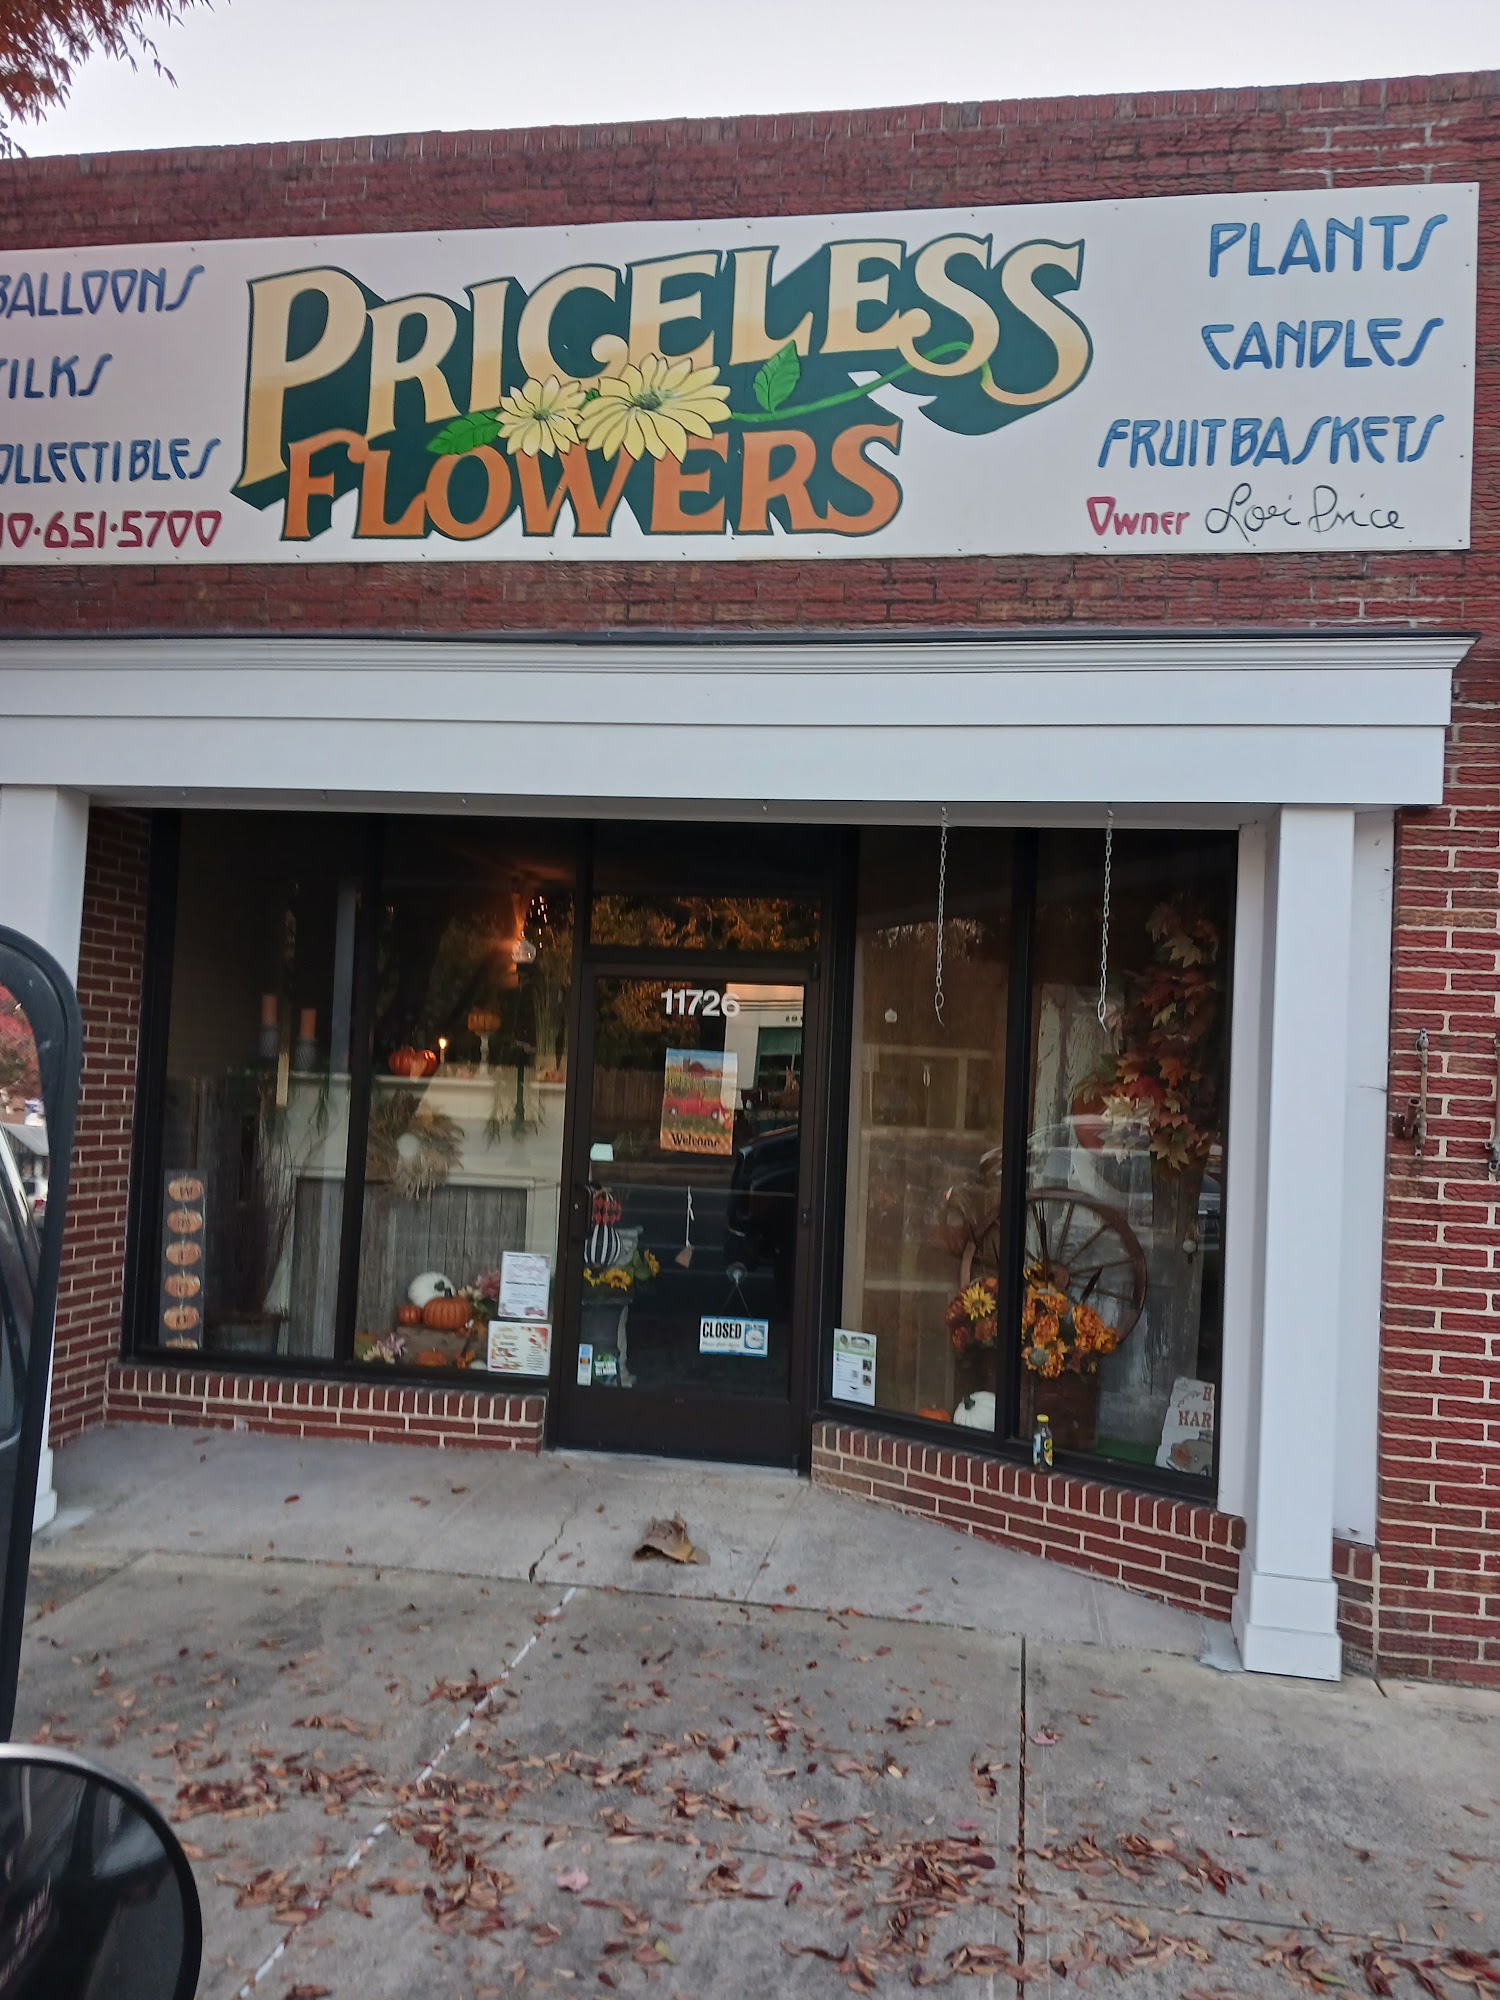 Priceless Flowers 11726 Somerset Ave, Princess Anne Maryland 21853